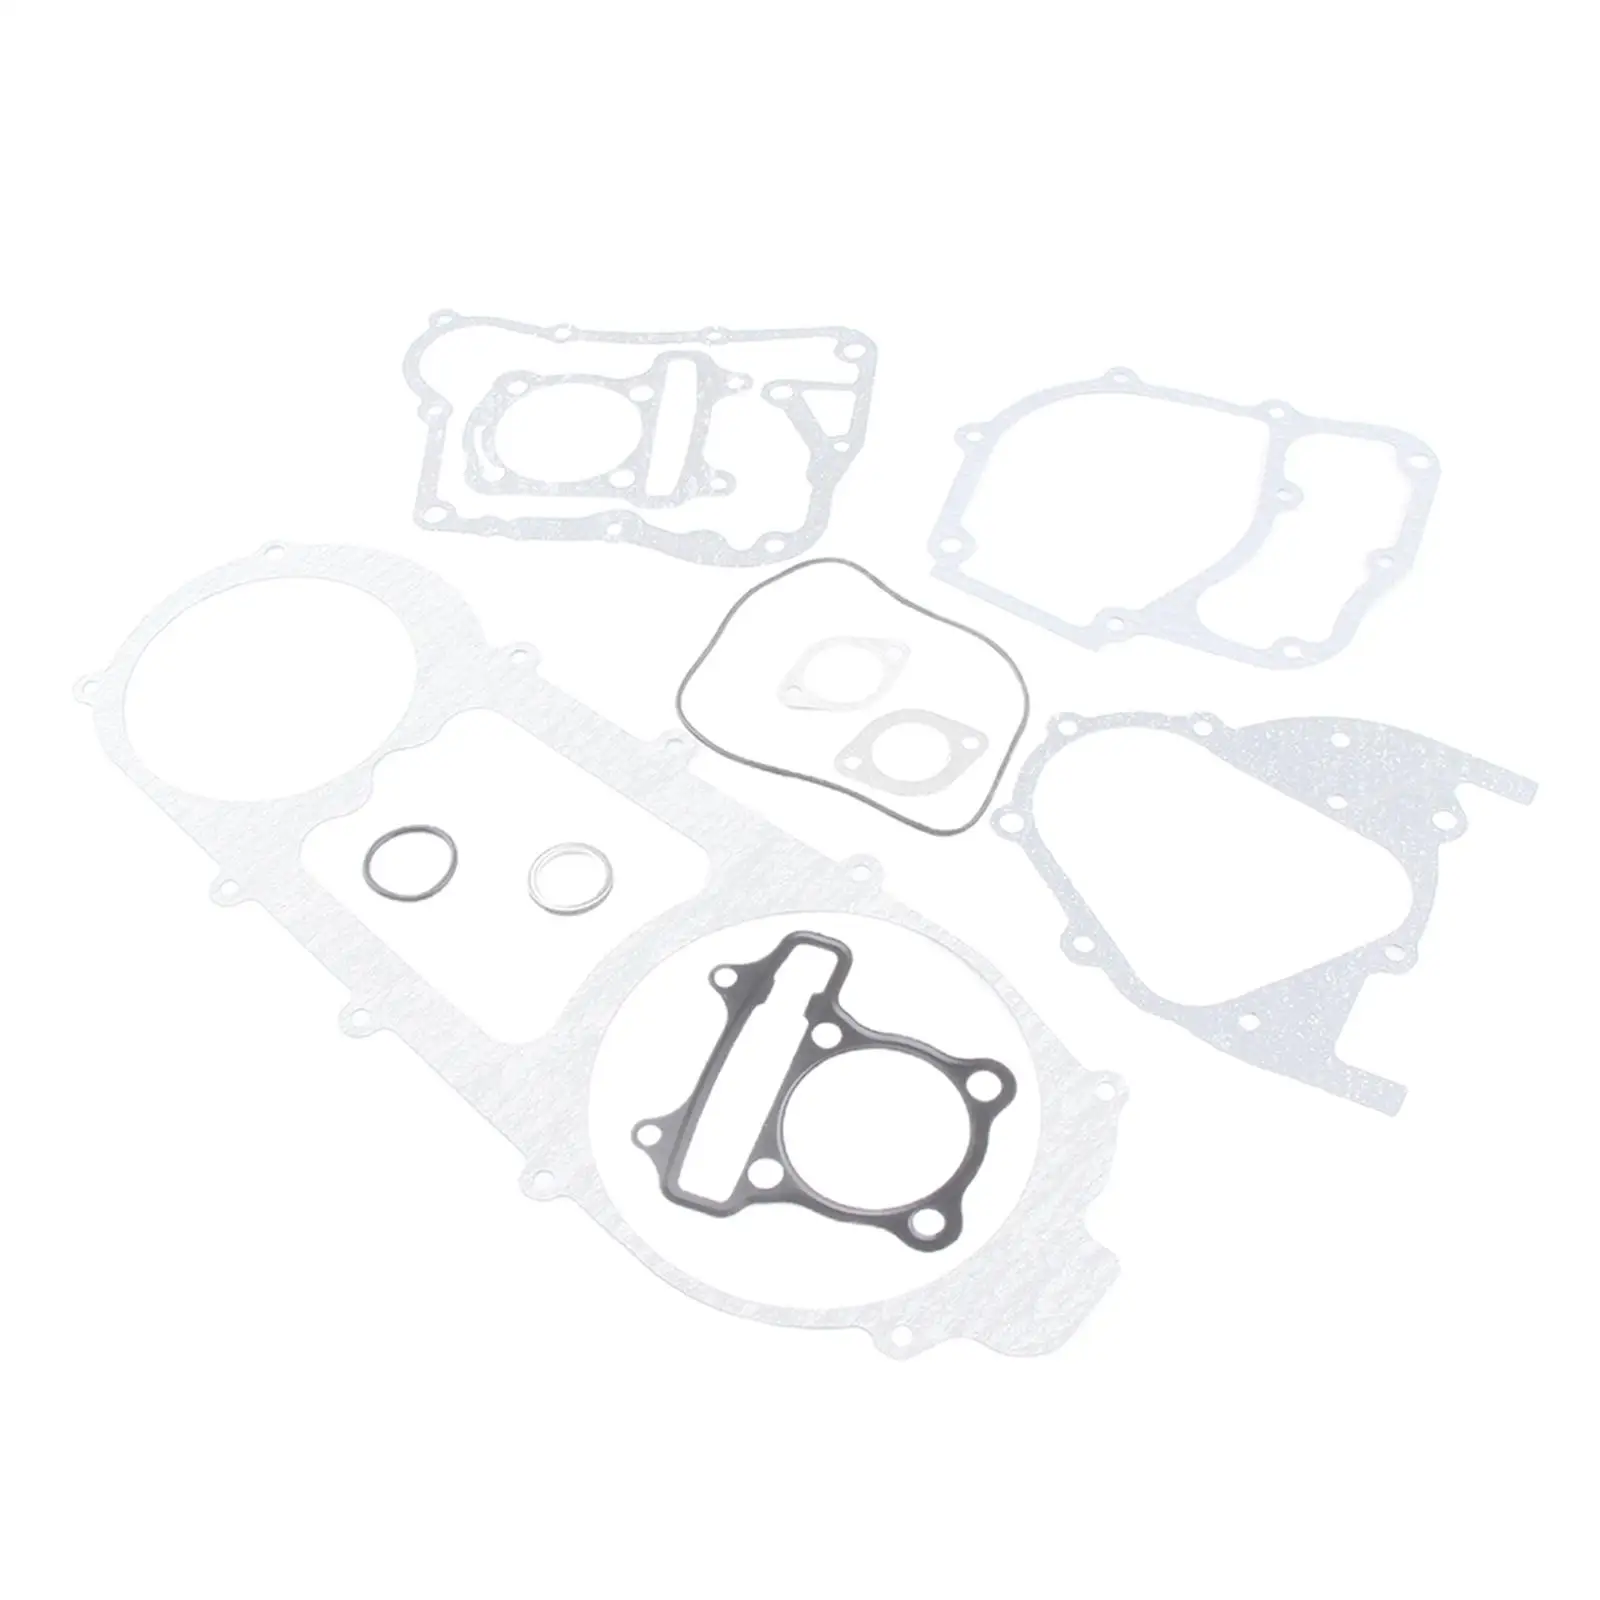  Long  Head Gasket Set Kit for GY6 150cc Moped Scooters  Go Karts QuadEasy to install.